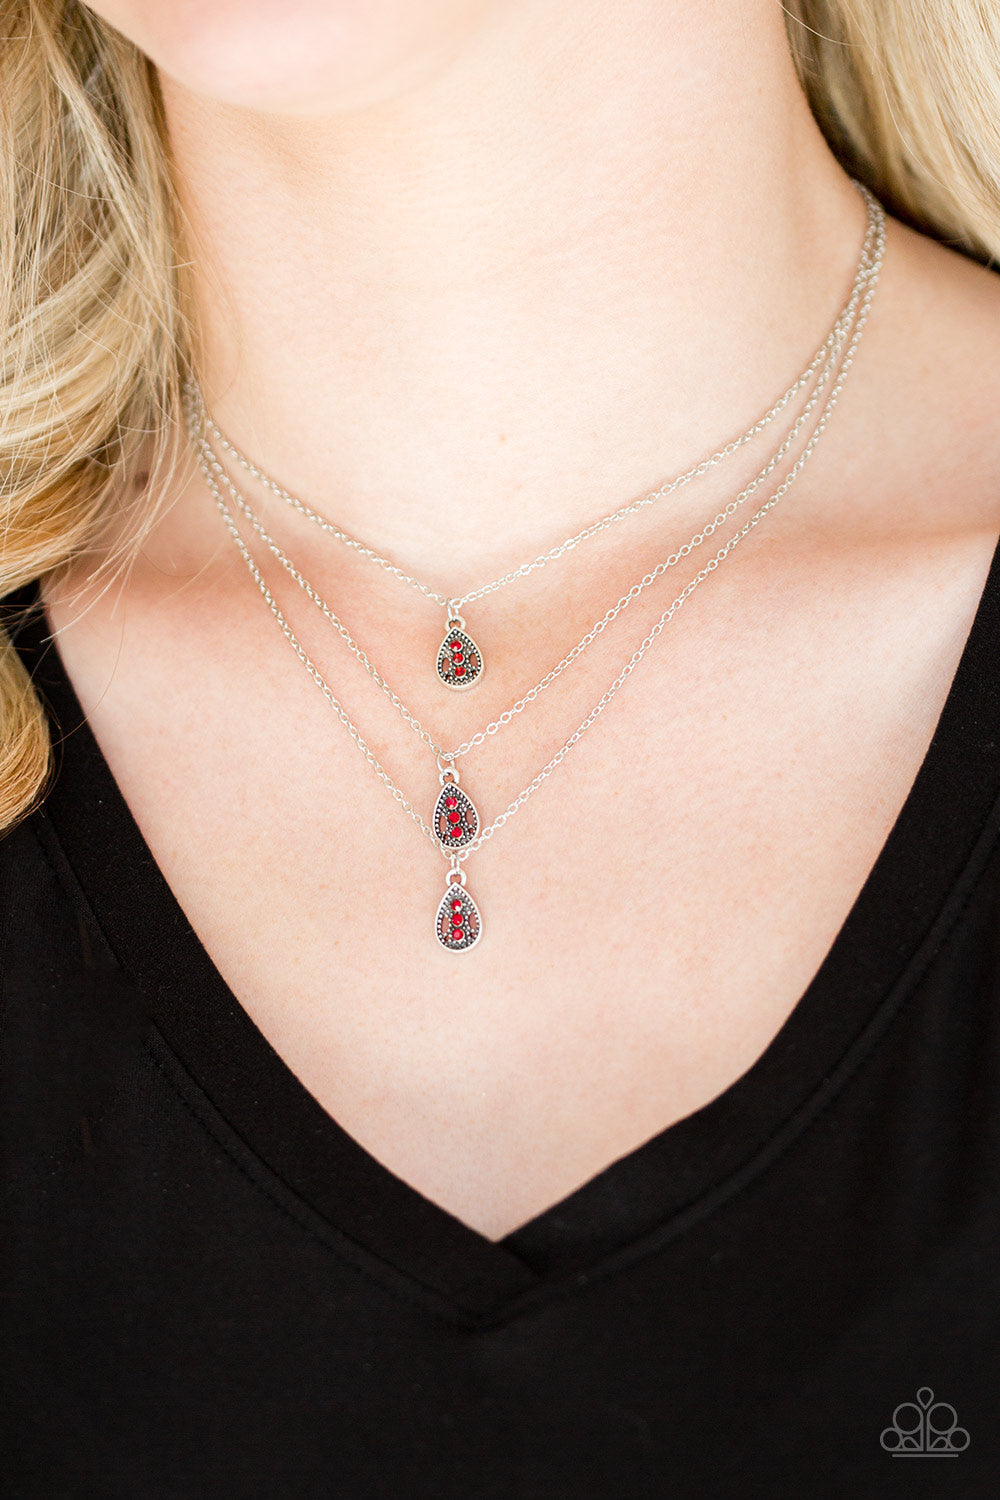 Paparazzi Radiant Rainfall - Red Rhinestones - Silver Necklace and matching Earrings - $5 Jewelry With Ashley Swint